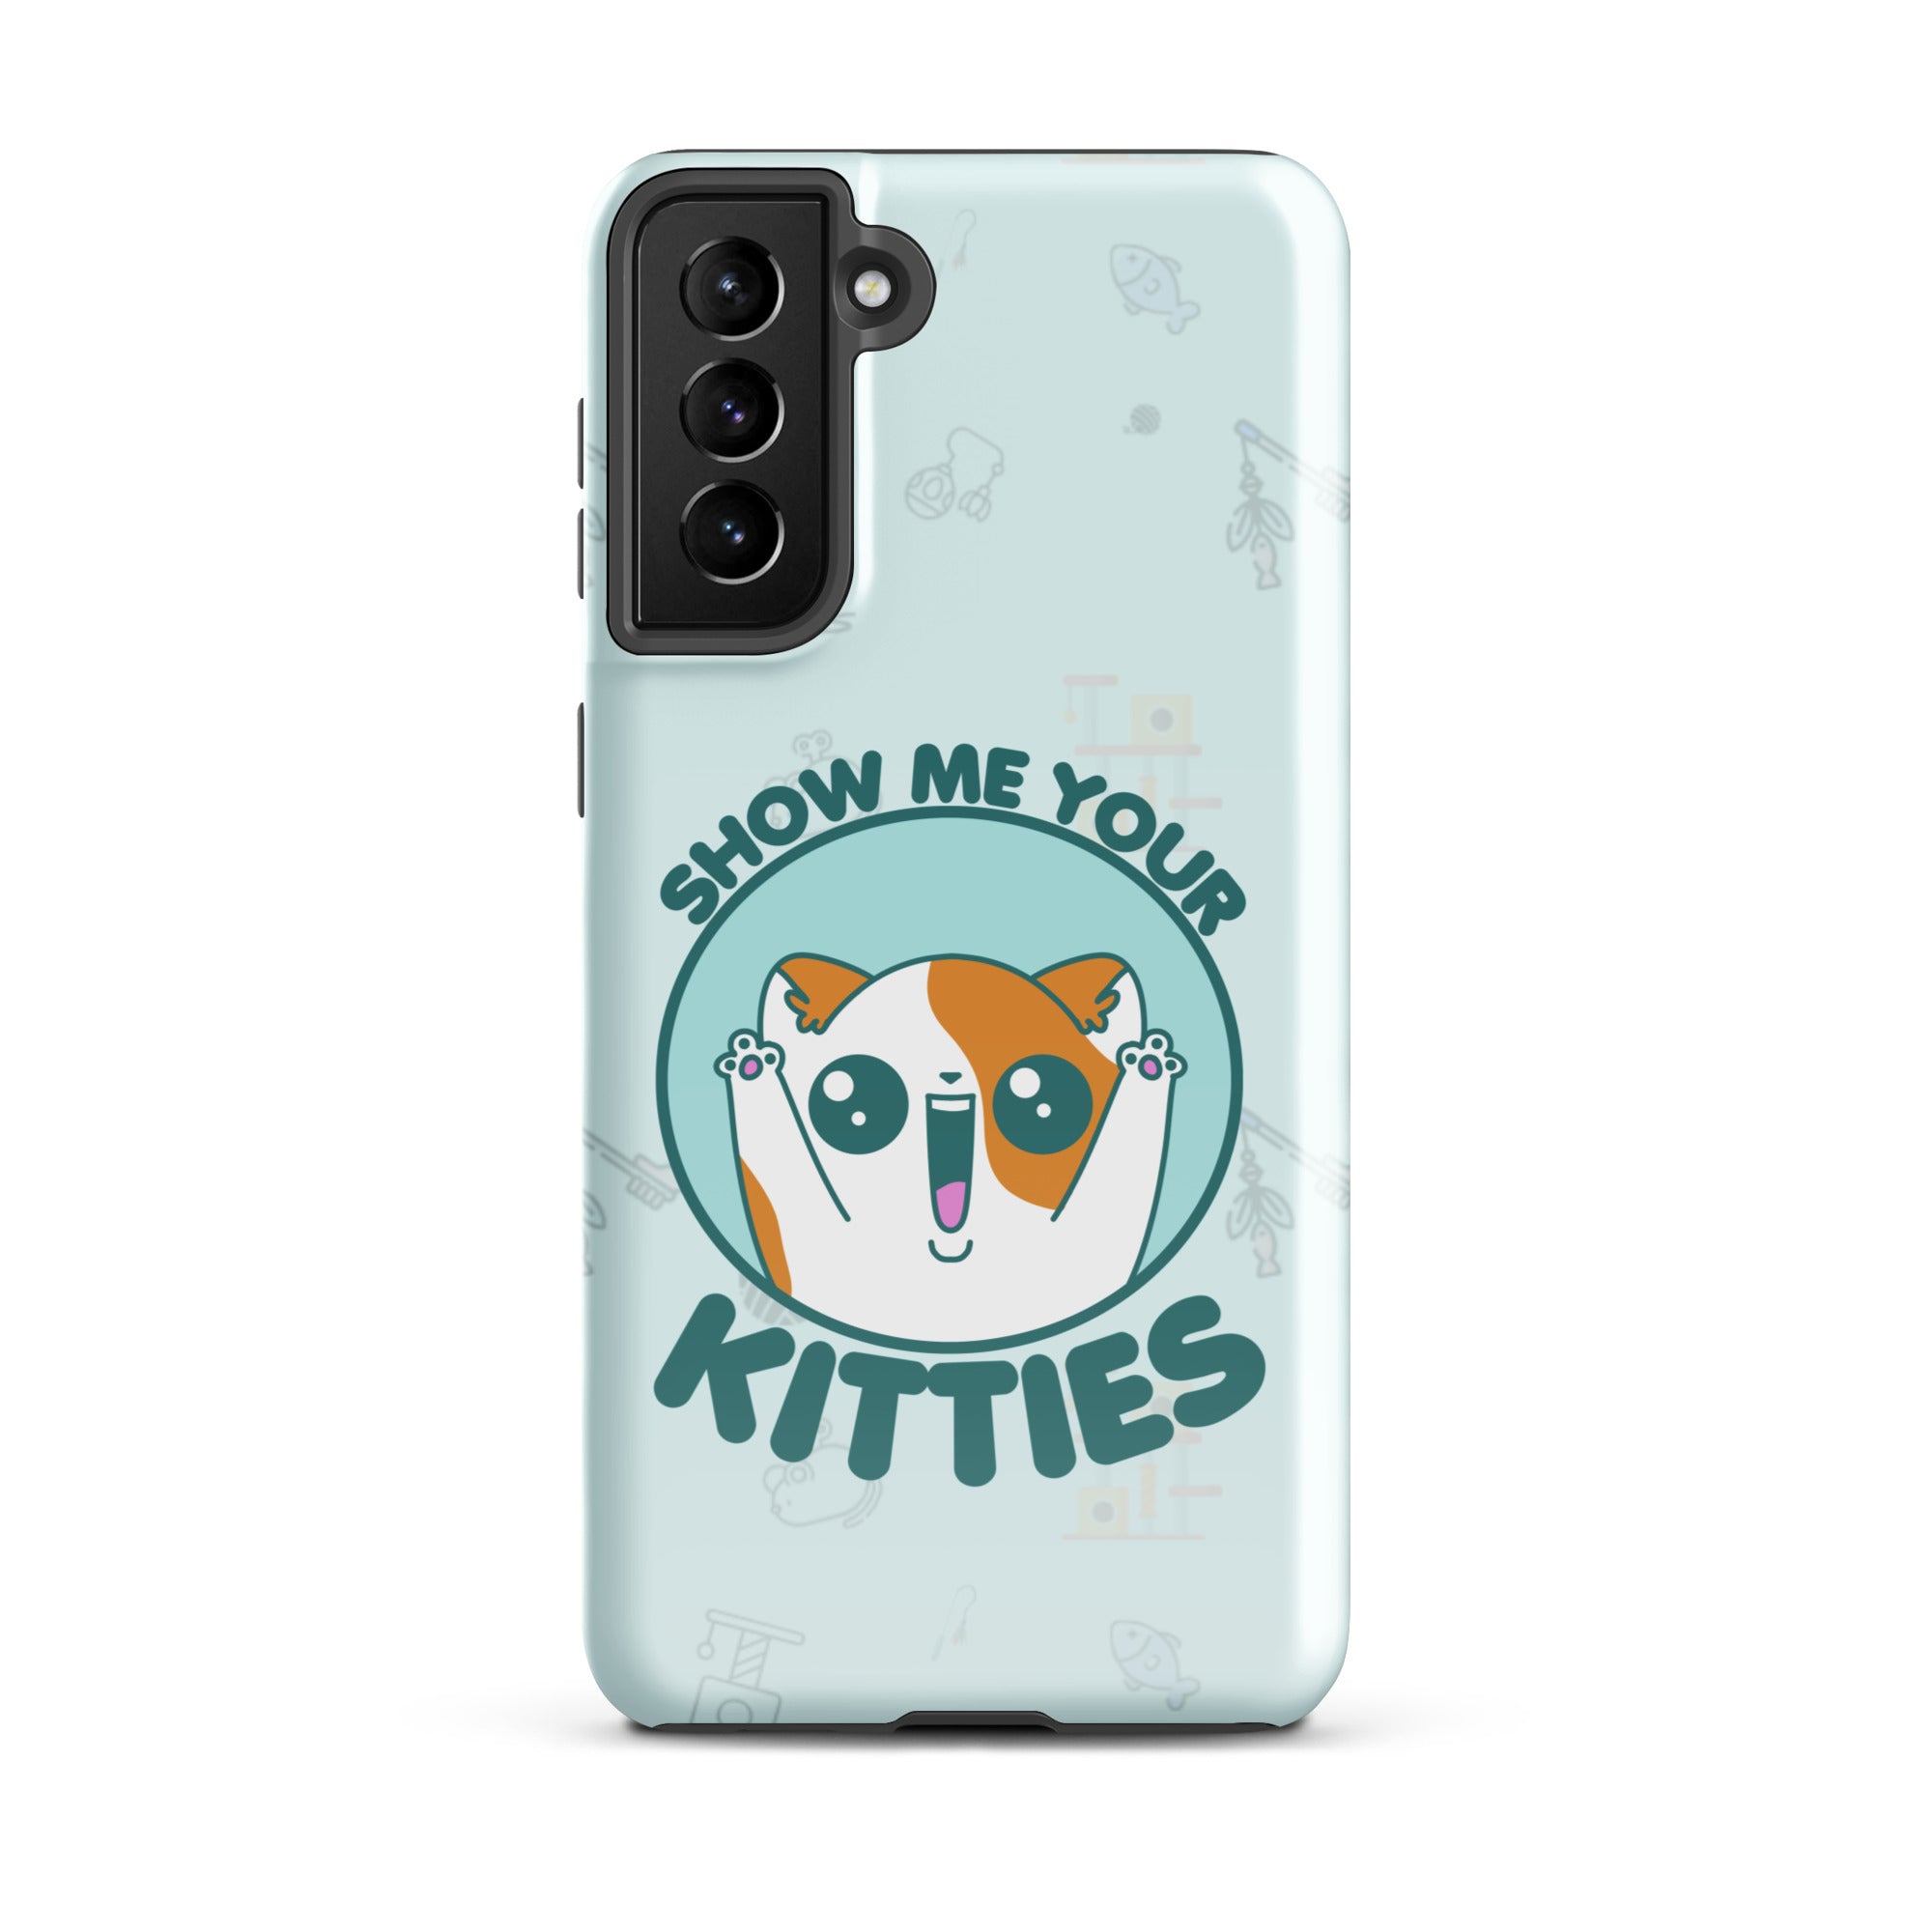 SHOW ME YOUR KITTIES W/BACKGROUND - Tough case for Samsung®